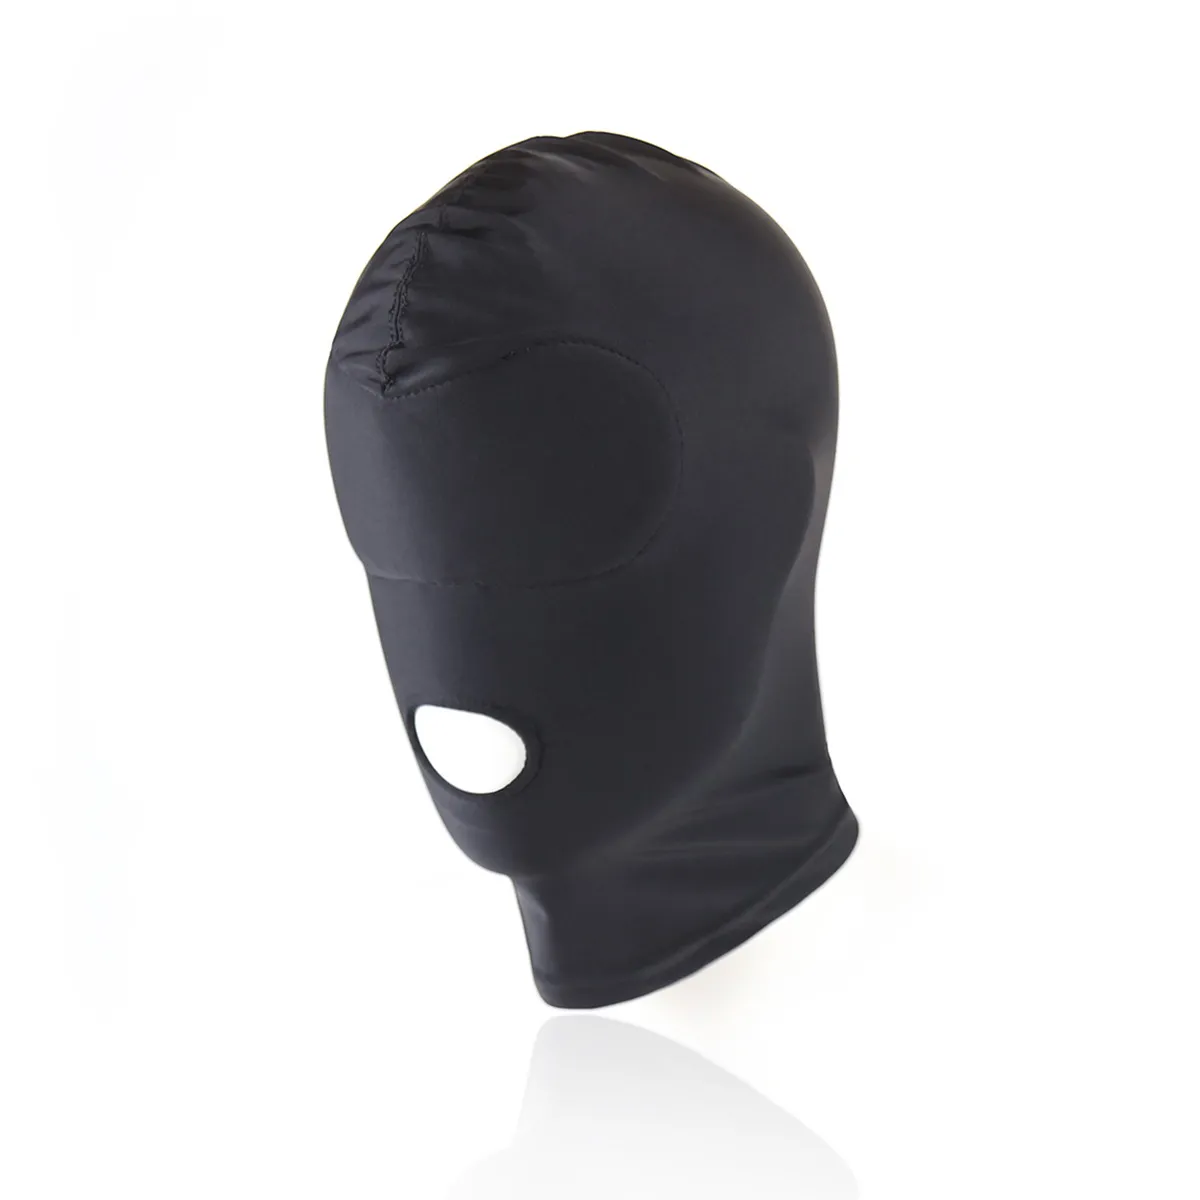 Sexy PU Leather Latex Hood Black Mask 4 tyles Breathable Headpiece Fetish BDSM Adult for party4714820